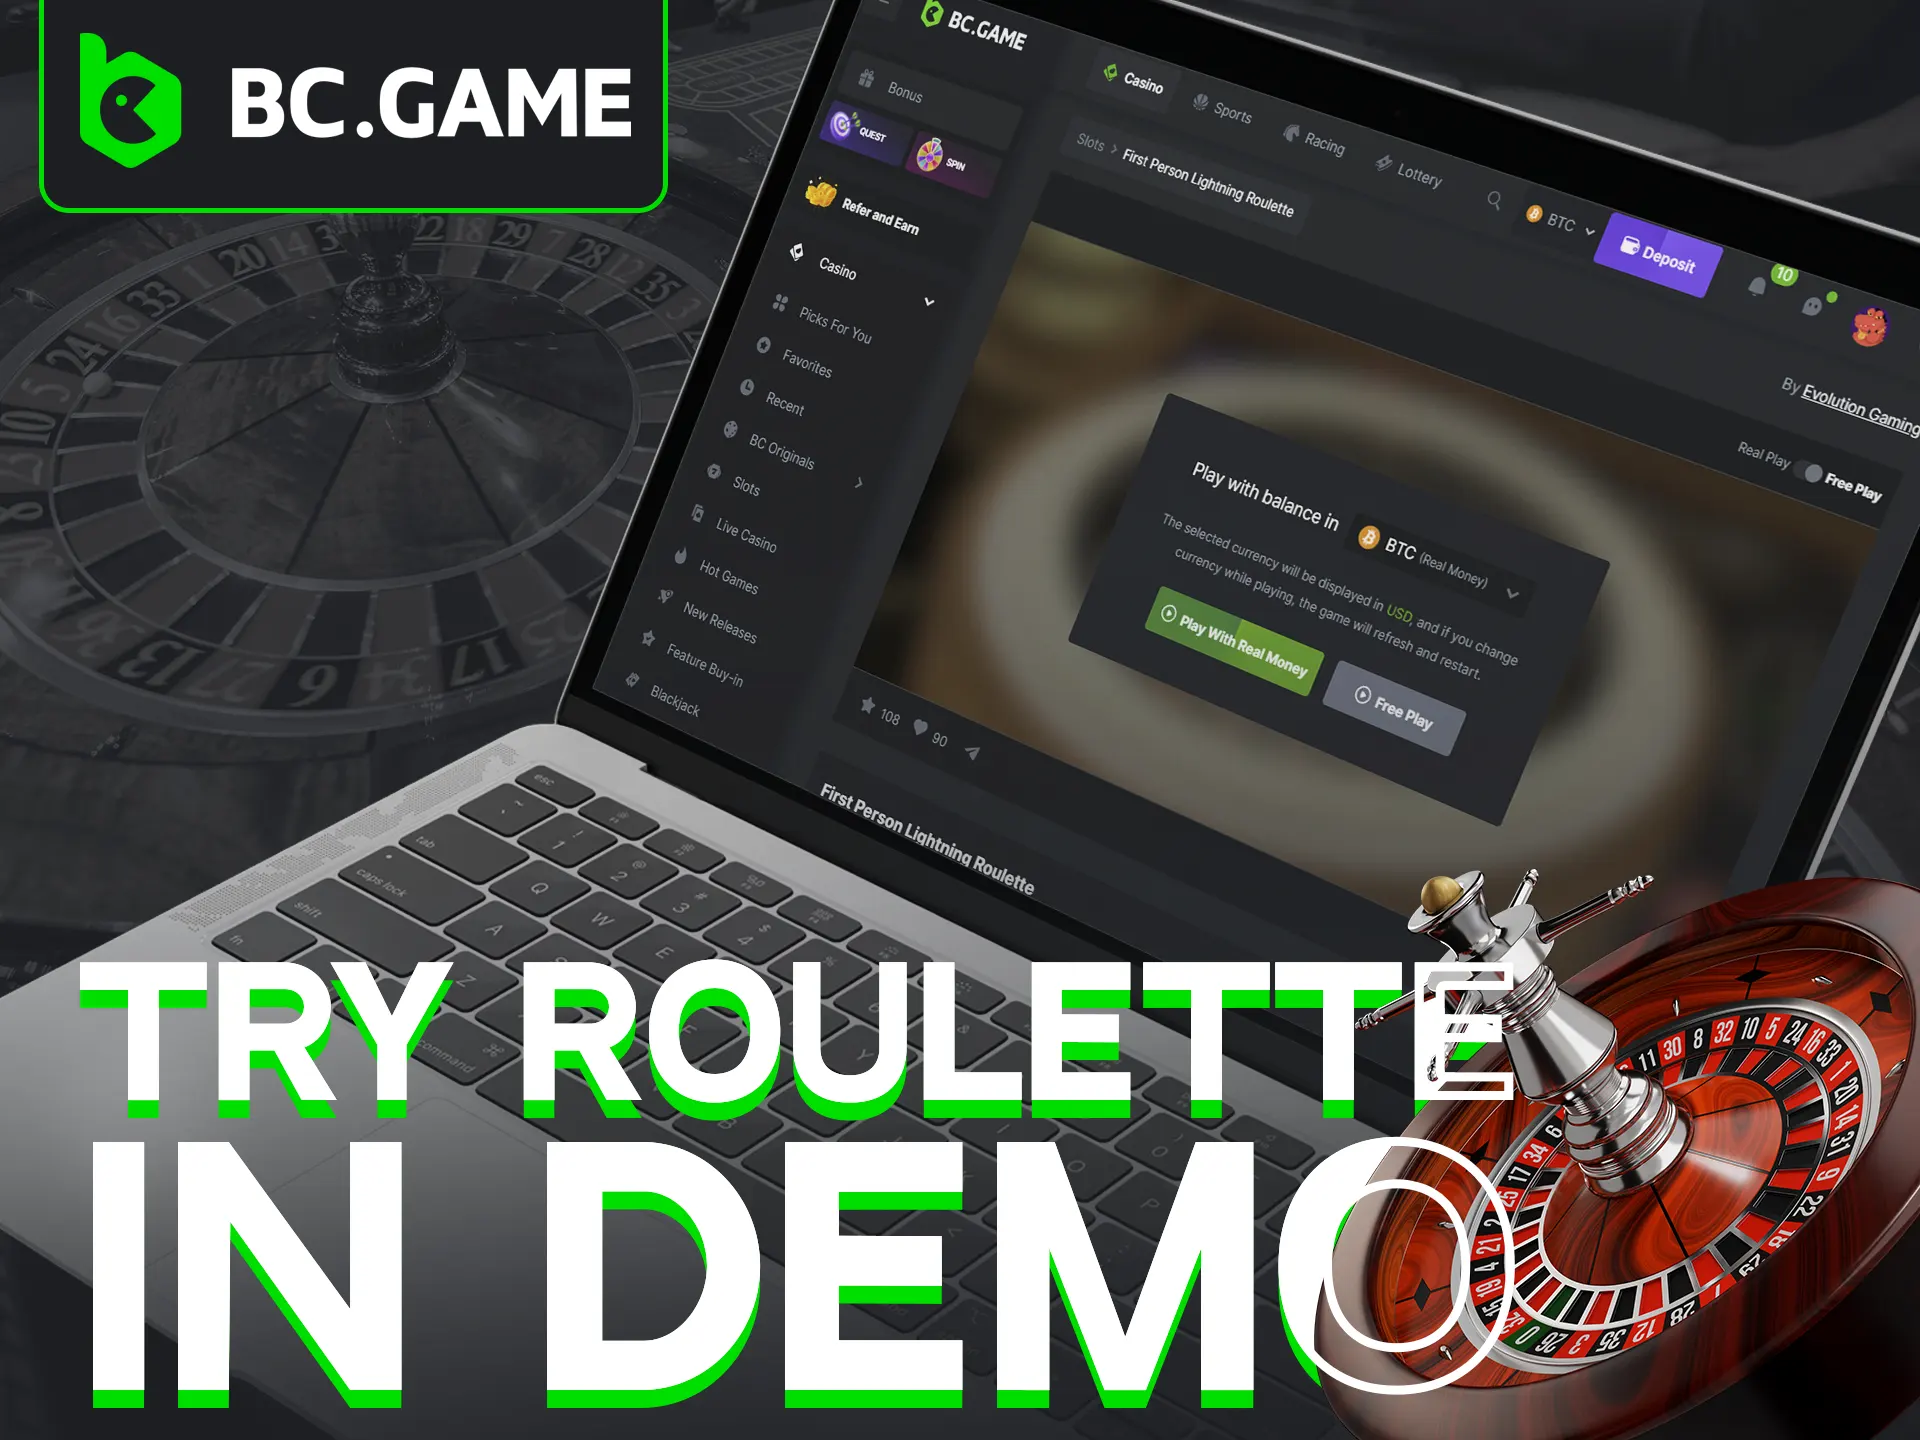 Test roulette for free with BC Game's demo mode.